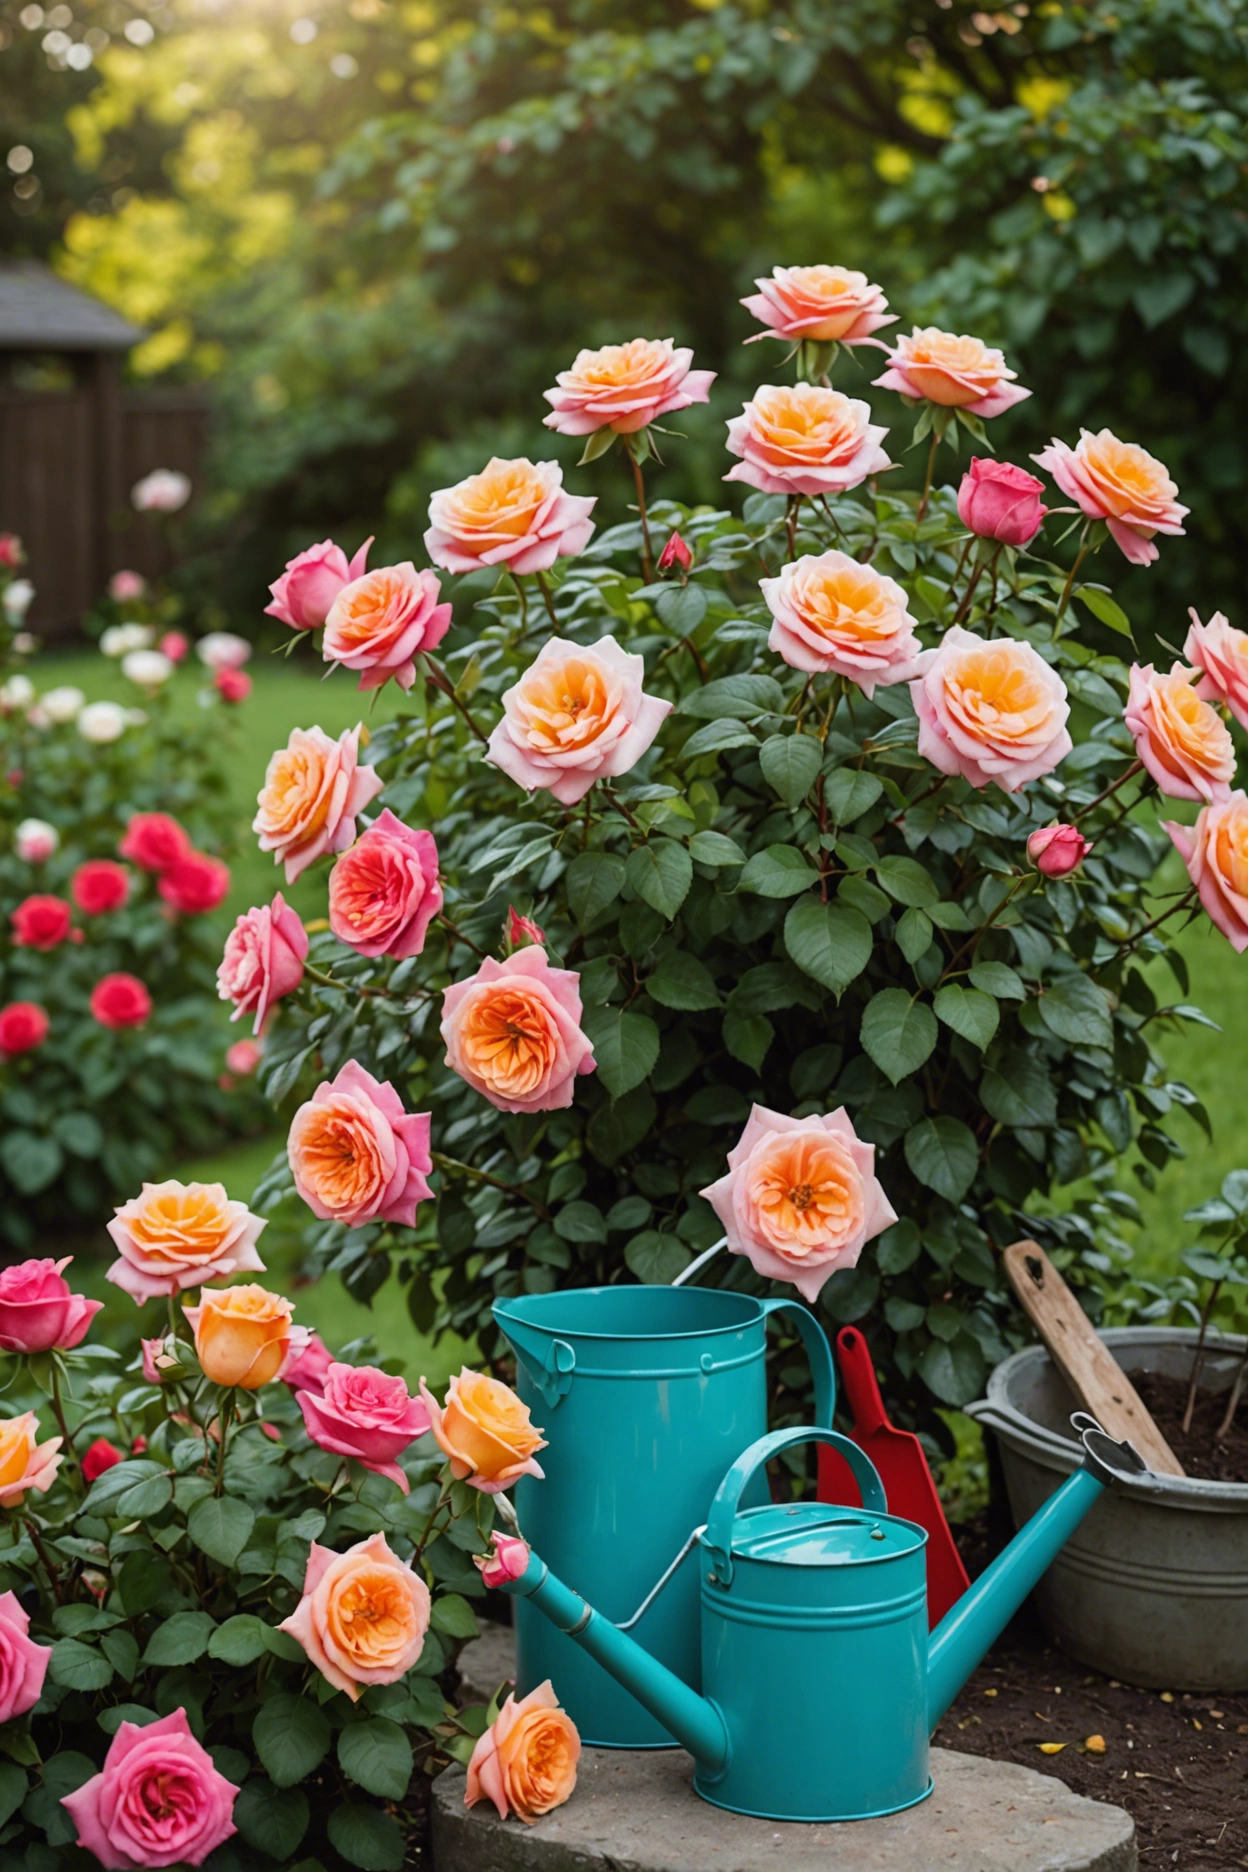 "Healthy rose bush in full bloom surrounded by gardening tools like pruning shears, a fertilizer bag, and a watering can in a blurred garden setting."